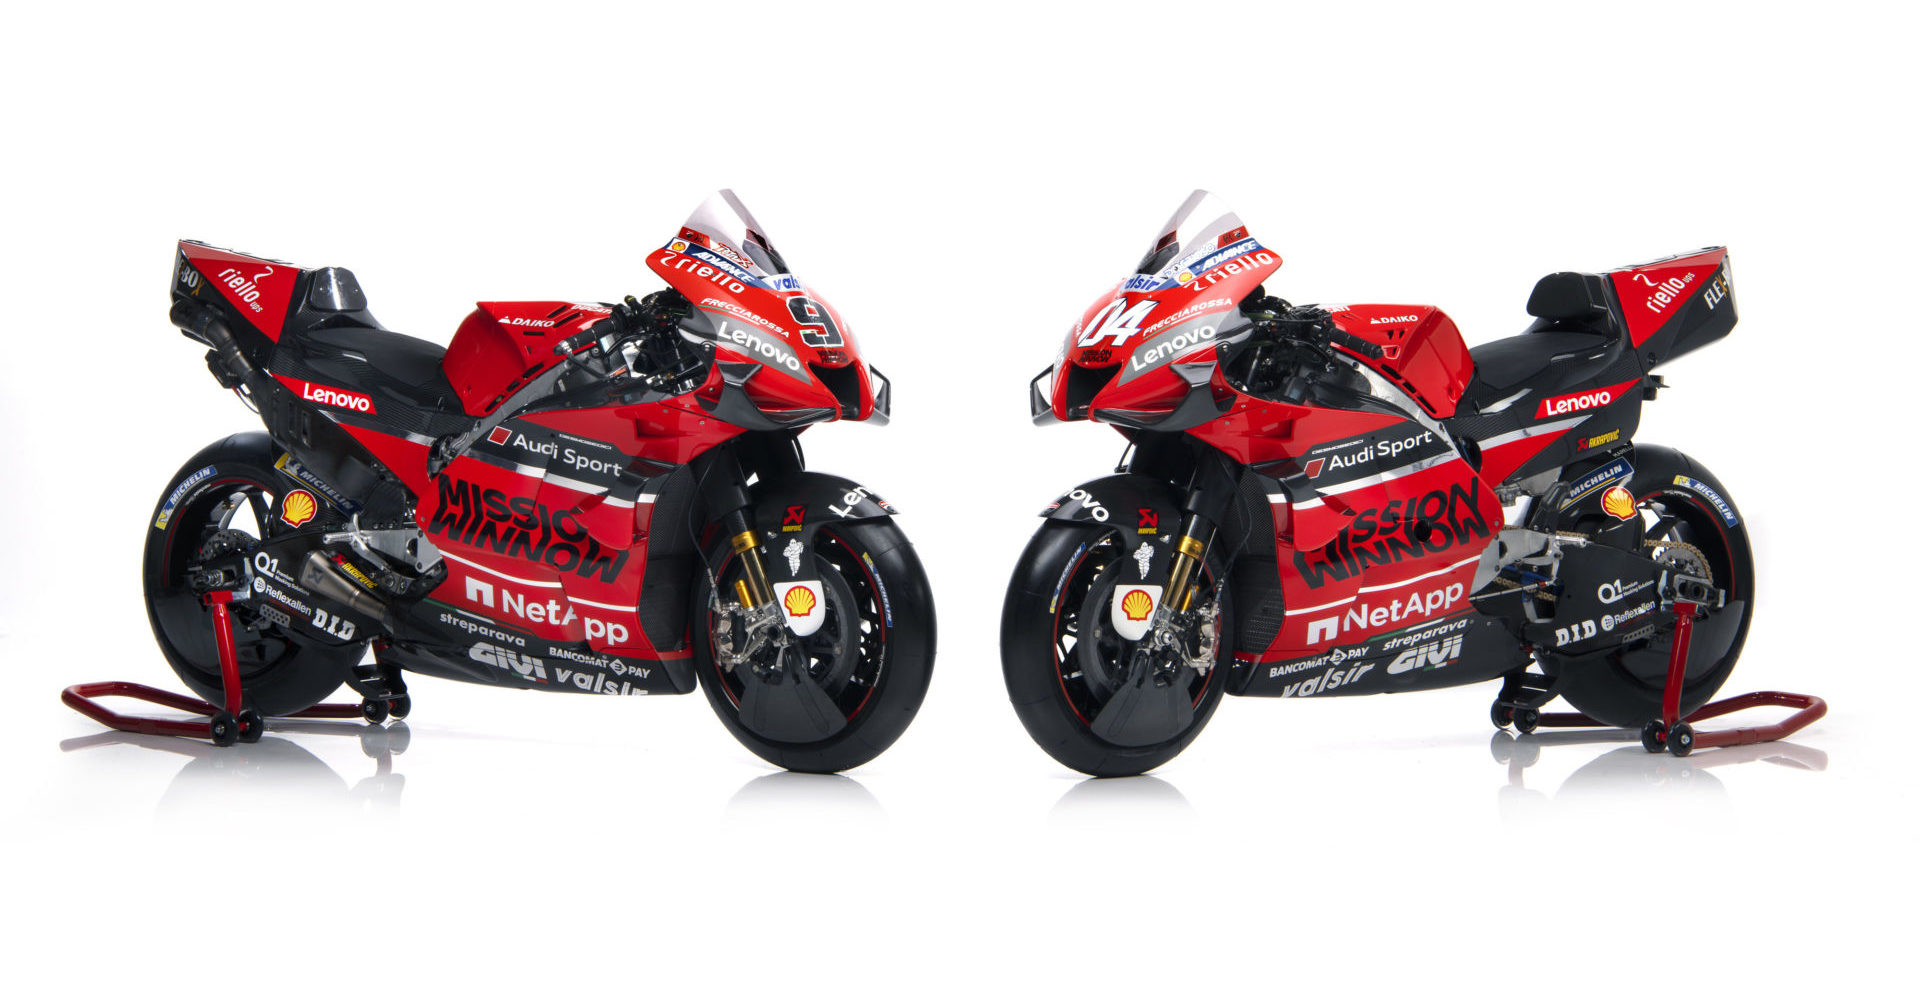 Motogp Technical Homologation Carried Out Remotely Roadracing World Magazine Motorcycle Riding Racing Tech News